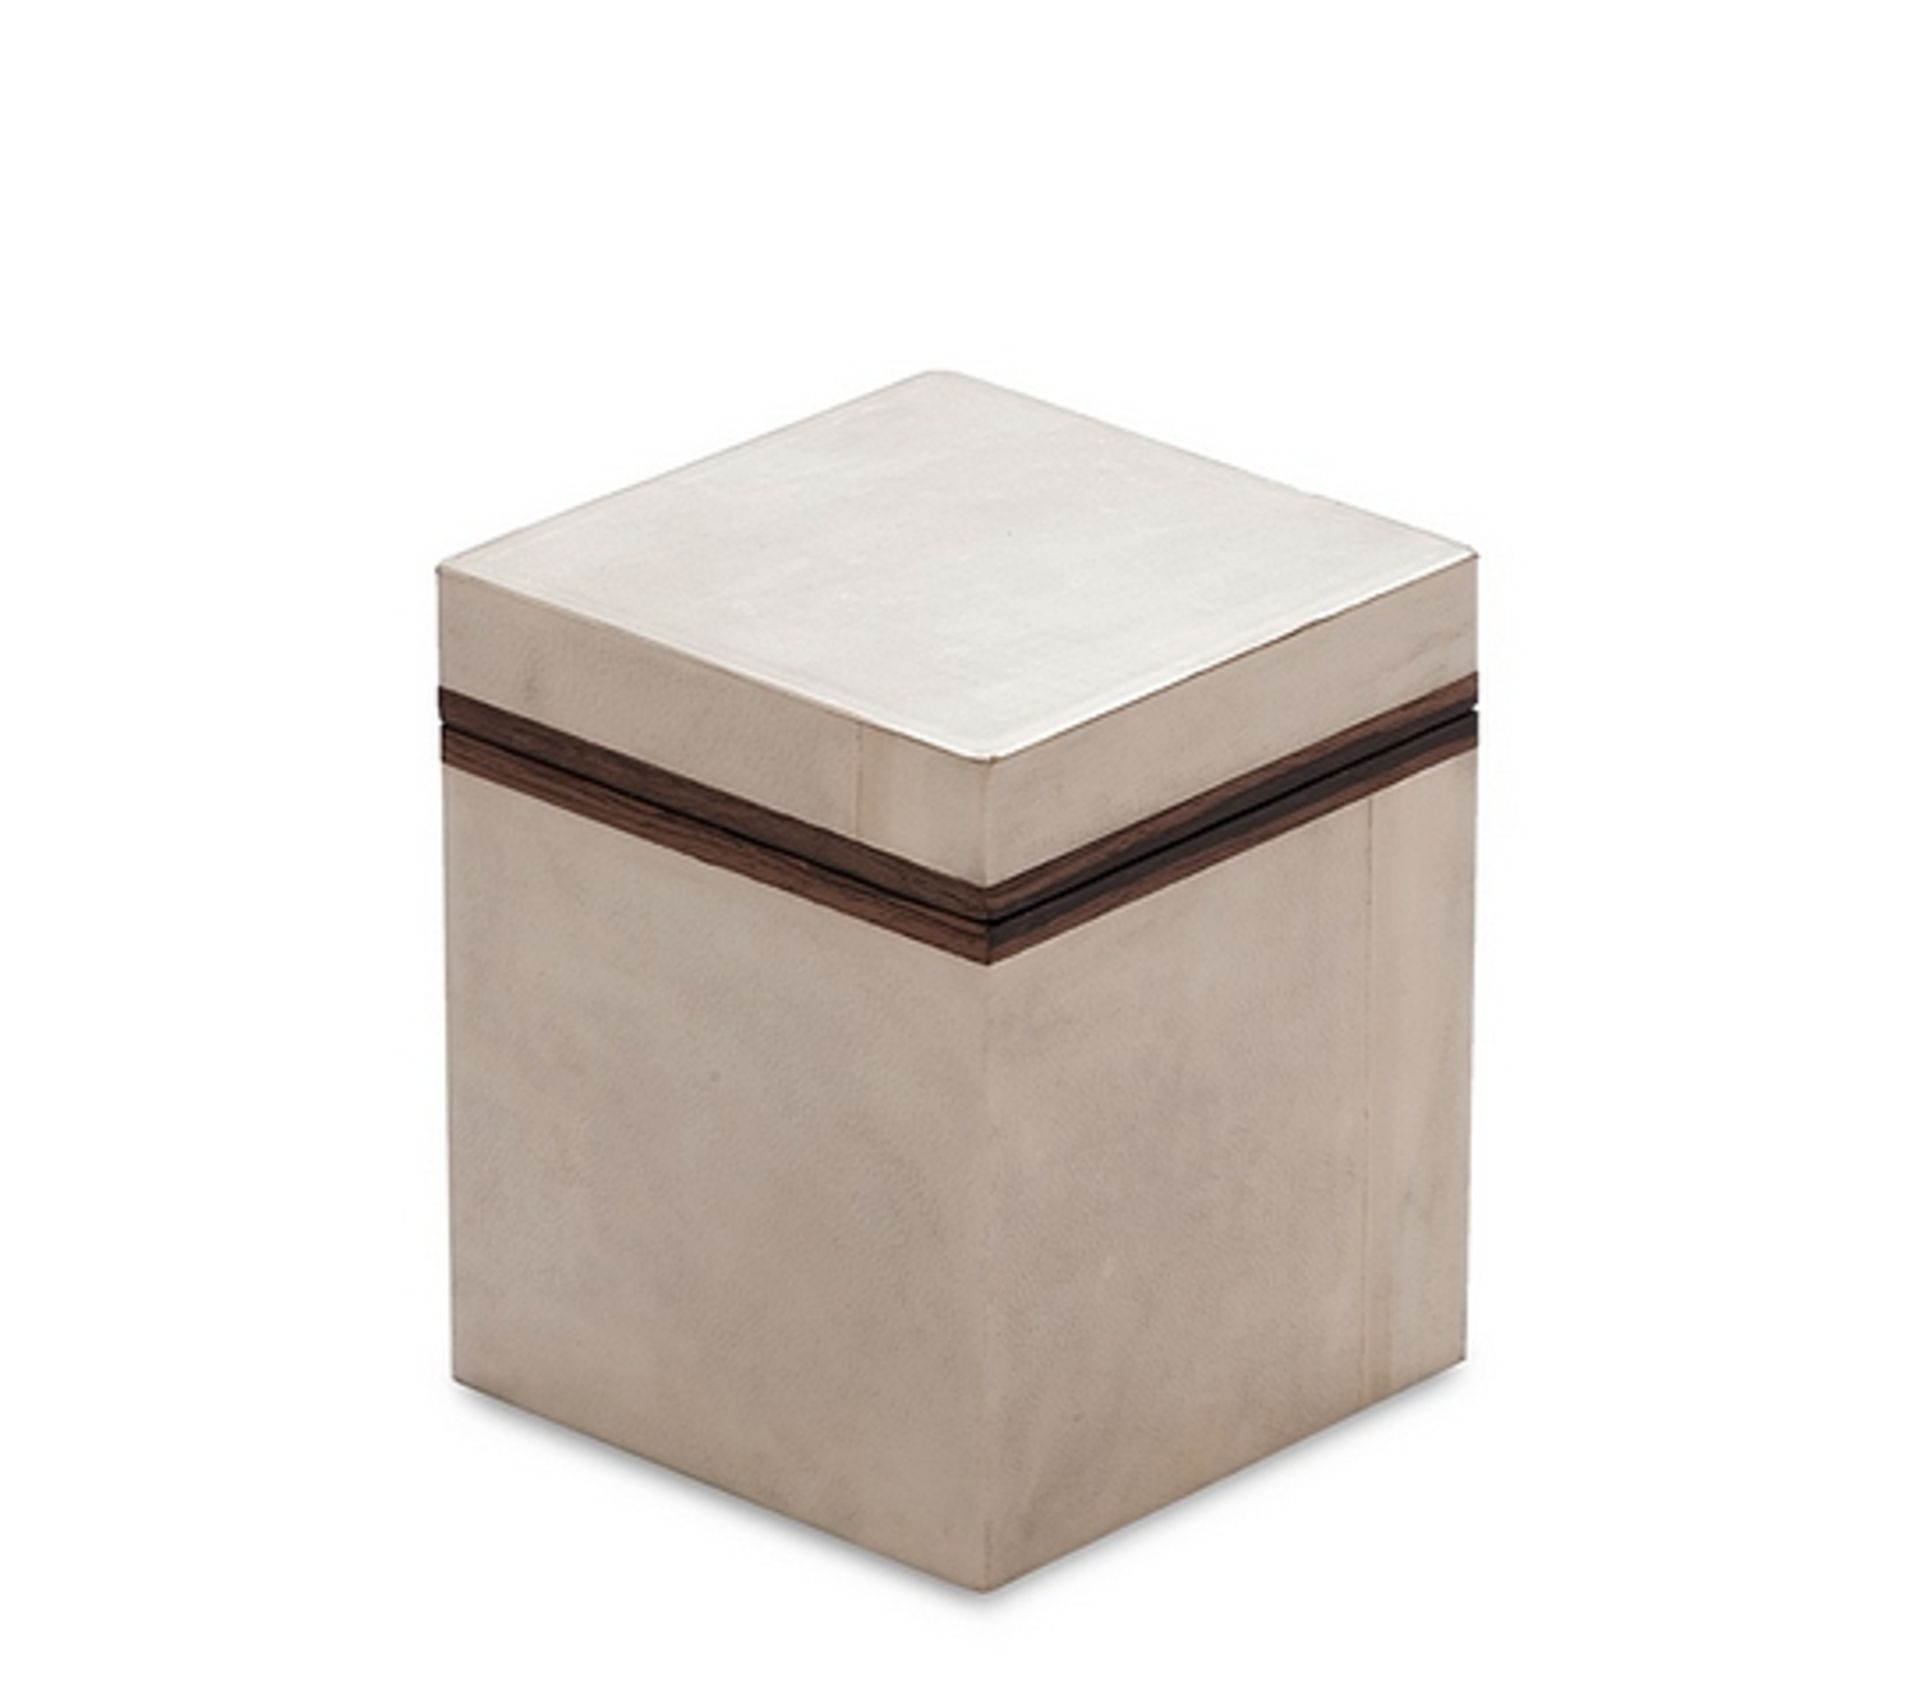 Box can water grey parchment and ebony. House your trinkets and precious gems in this box. Neutral